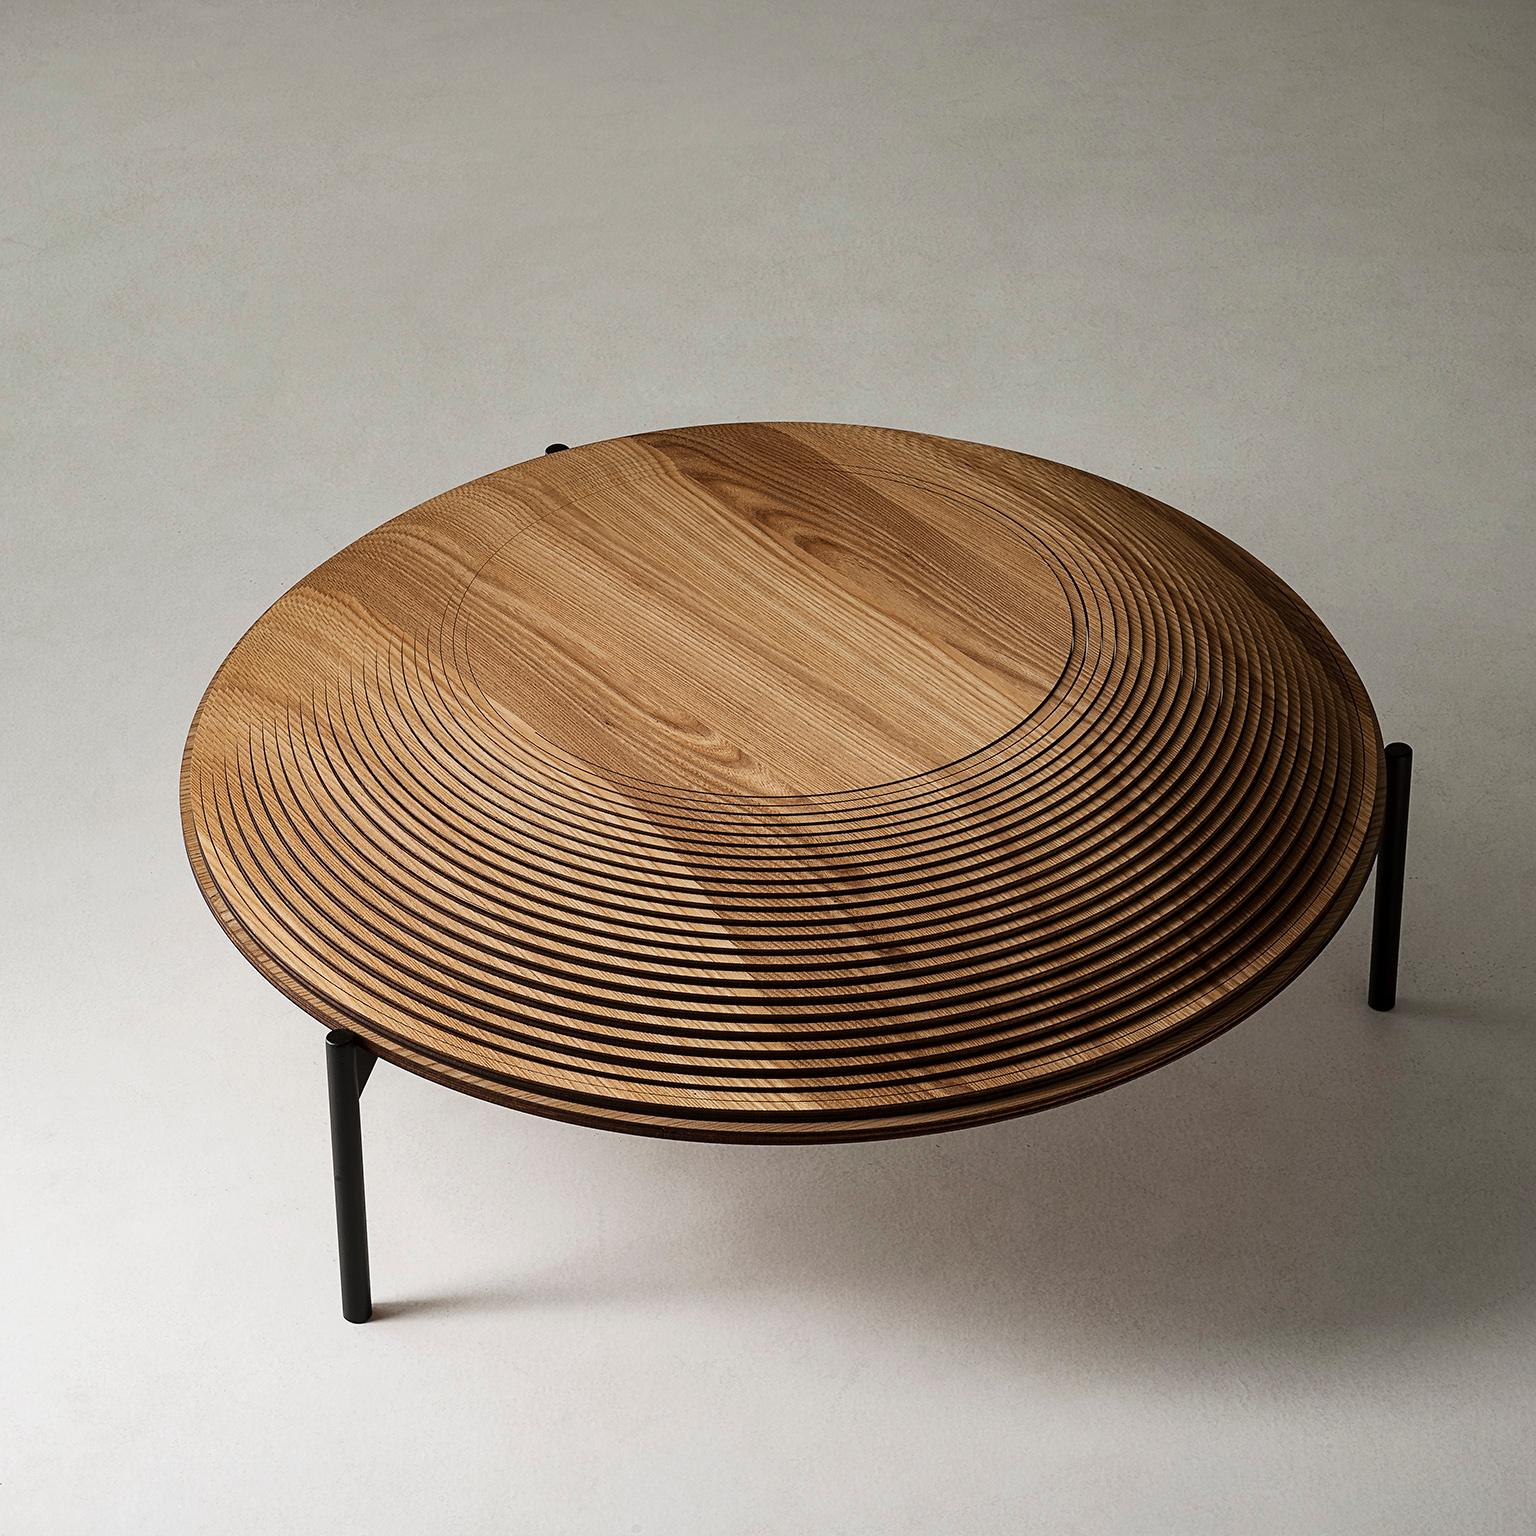 This magnificent sculptural coffee table will add a mesmerizing architectural decoration in a modern interior while serving as a textural accent in a room. Crafted entirely of wood using an innovative method that creates a three-dimensional effect.